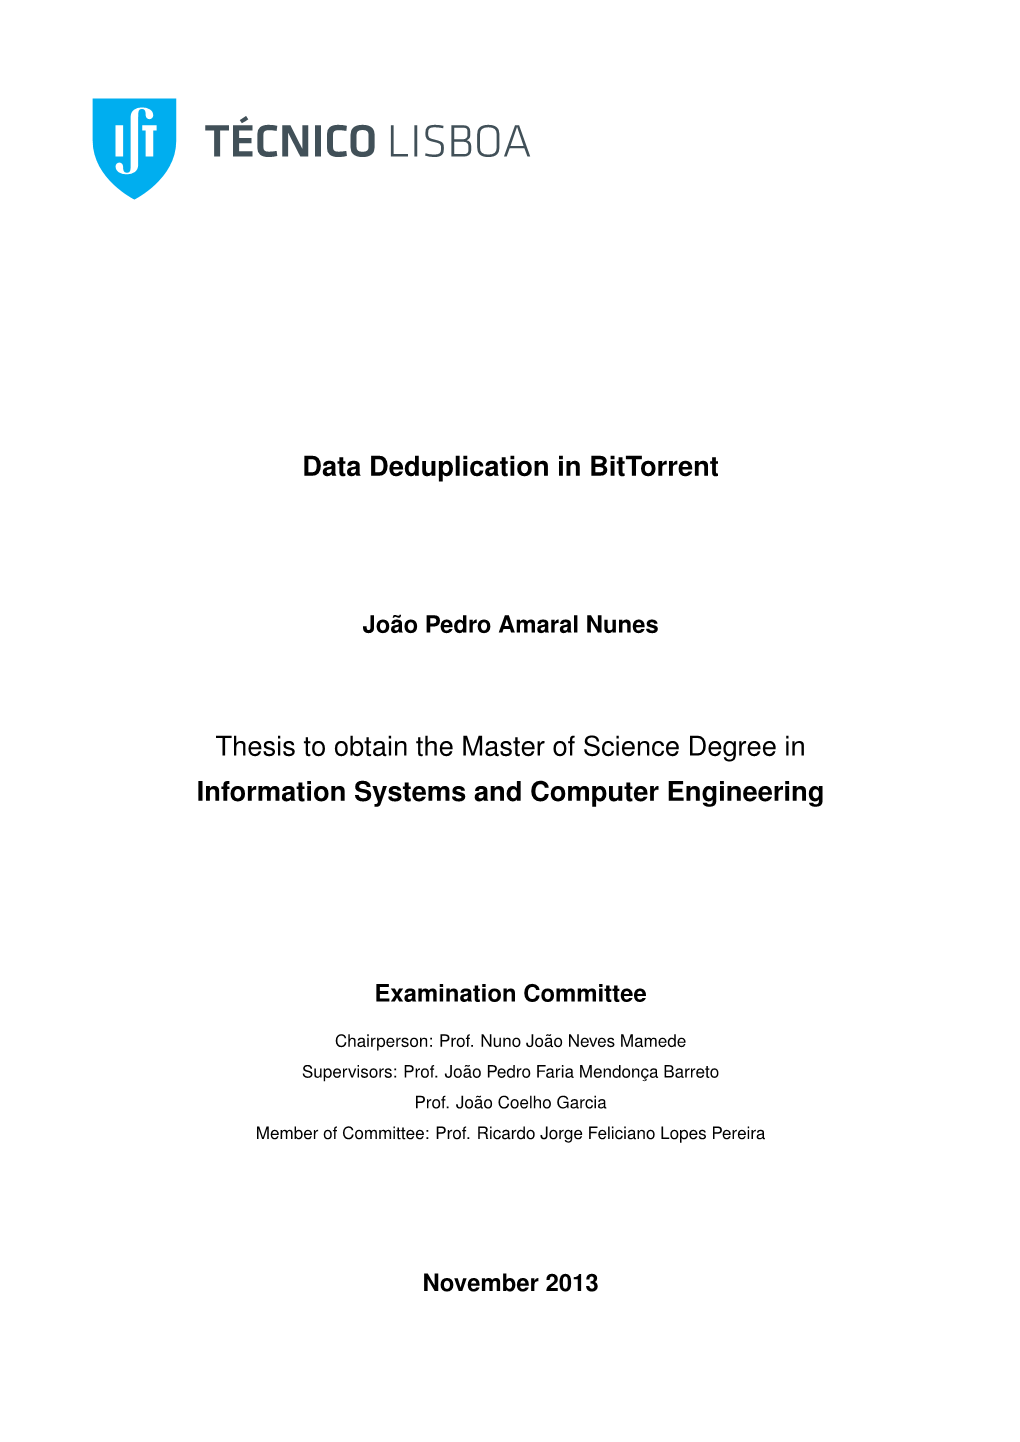 Data Deduplication in Bittorrent Thesis to Obtain the Master Of